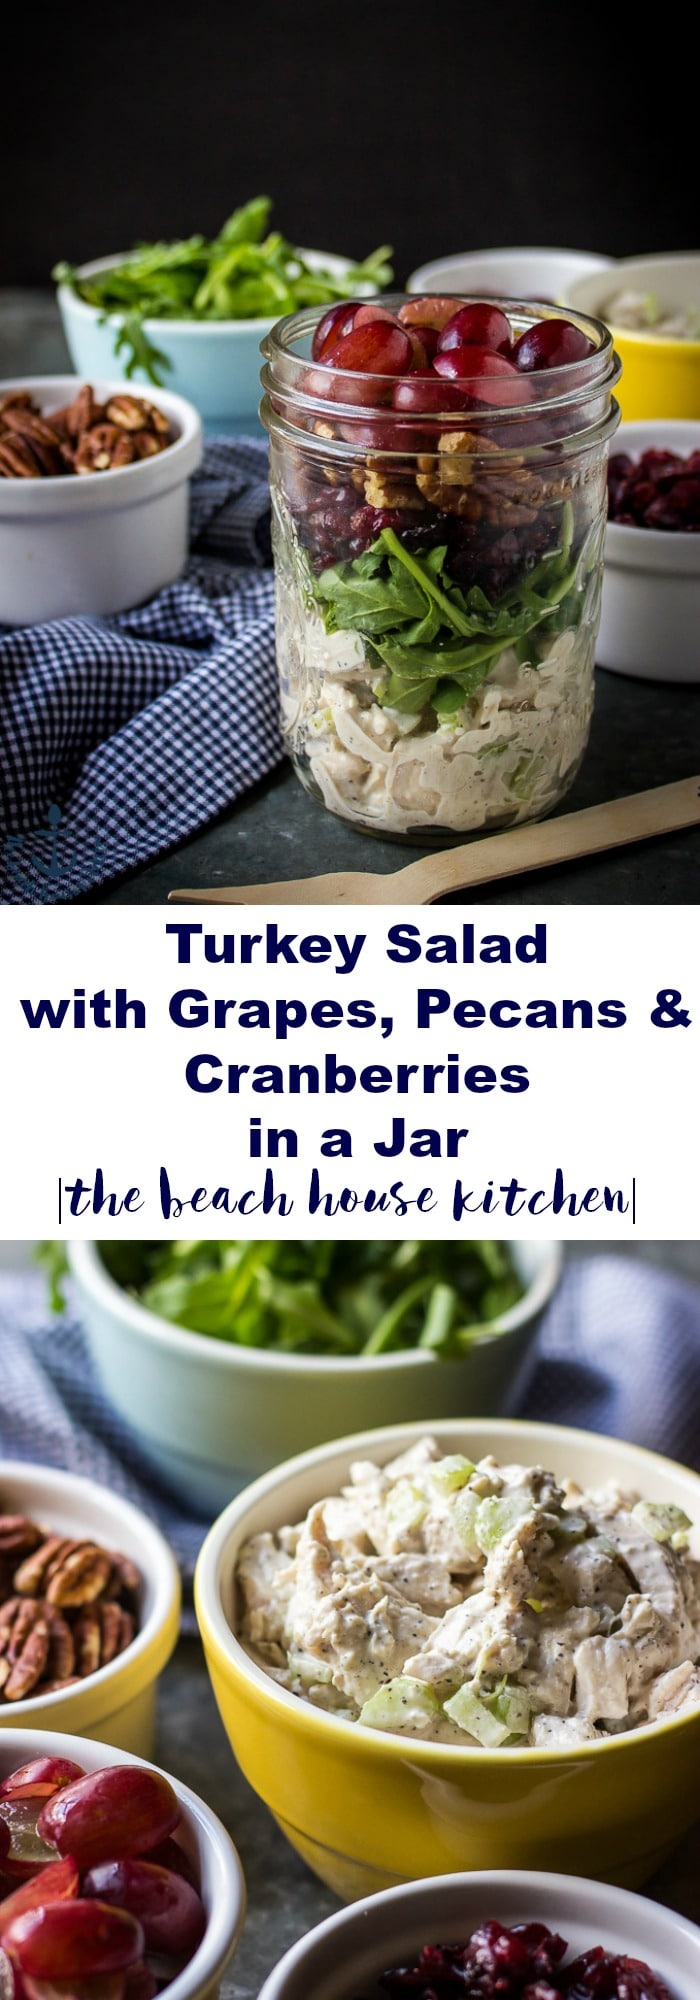 Turkey Salad with Grapes, Pecans and Cranberries in a Jar